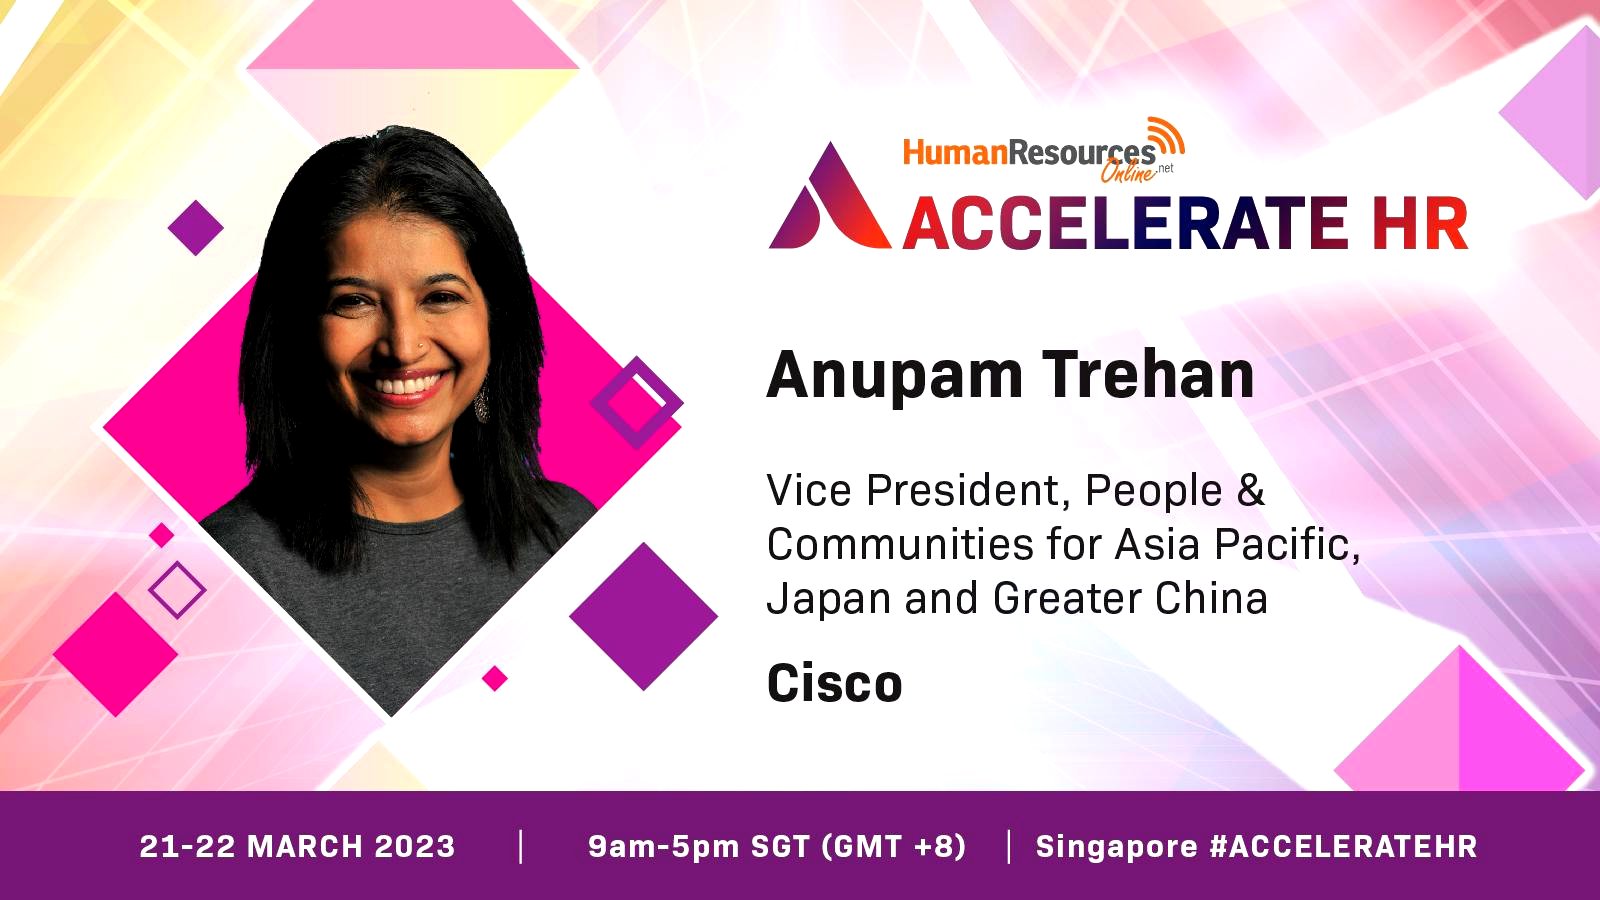 Real connections happen when your people feel heard, says Cisco's Anupam Trehan